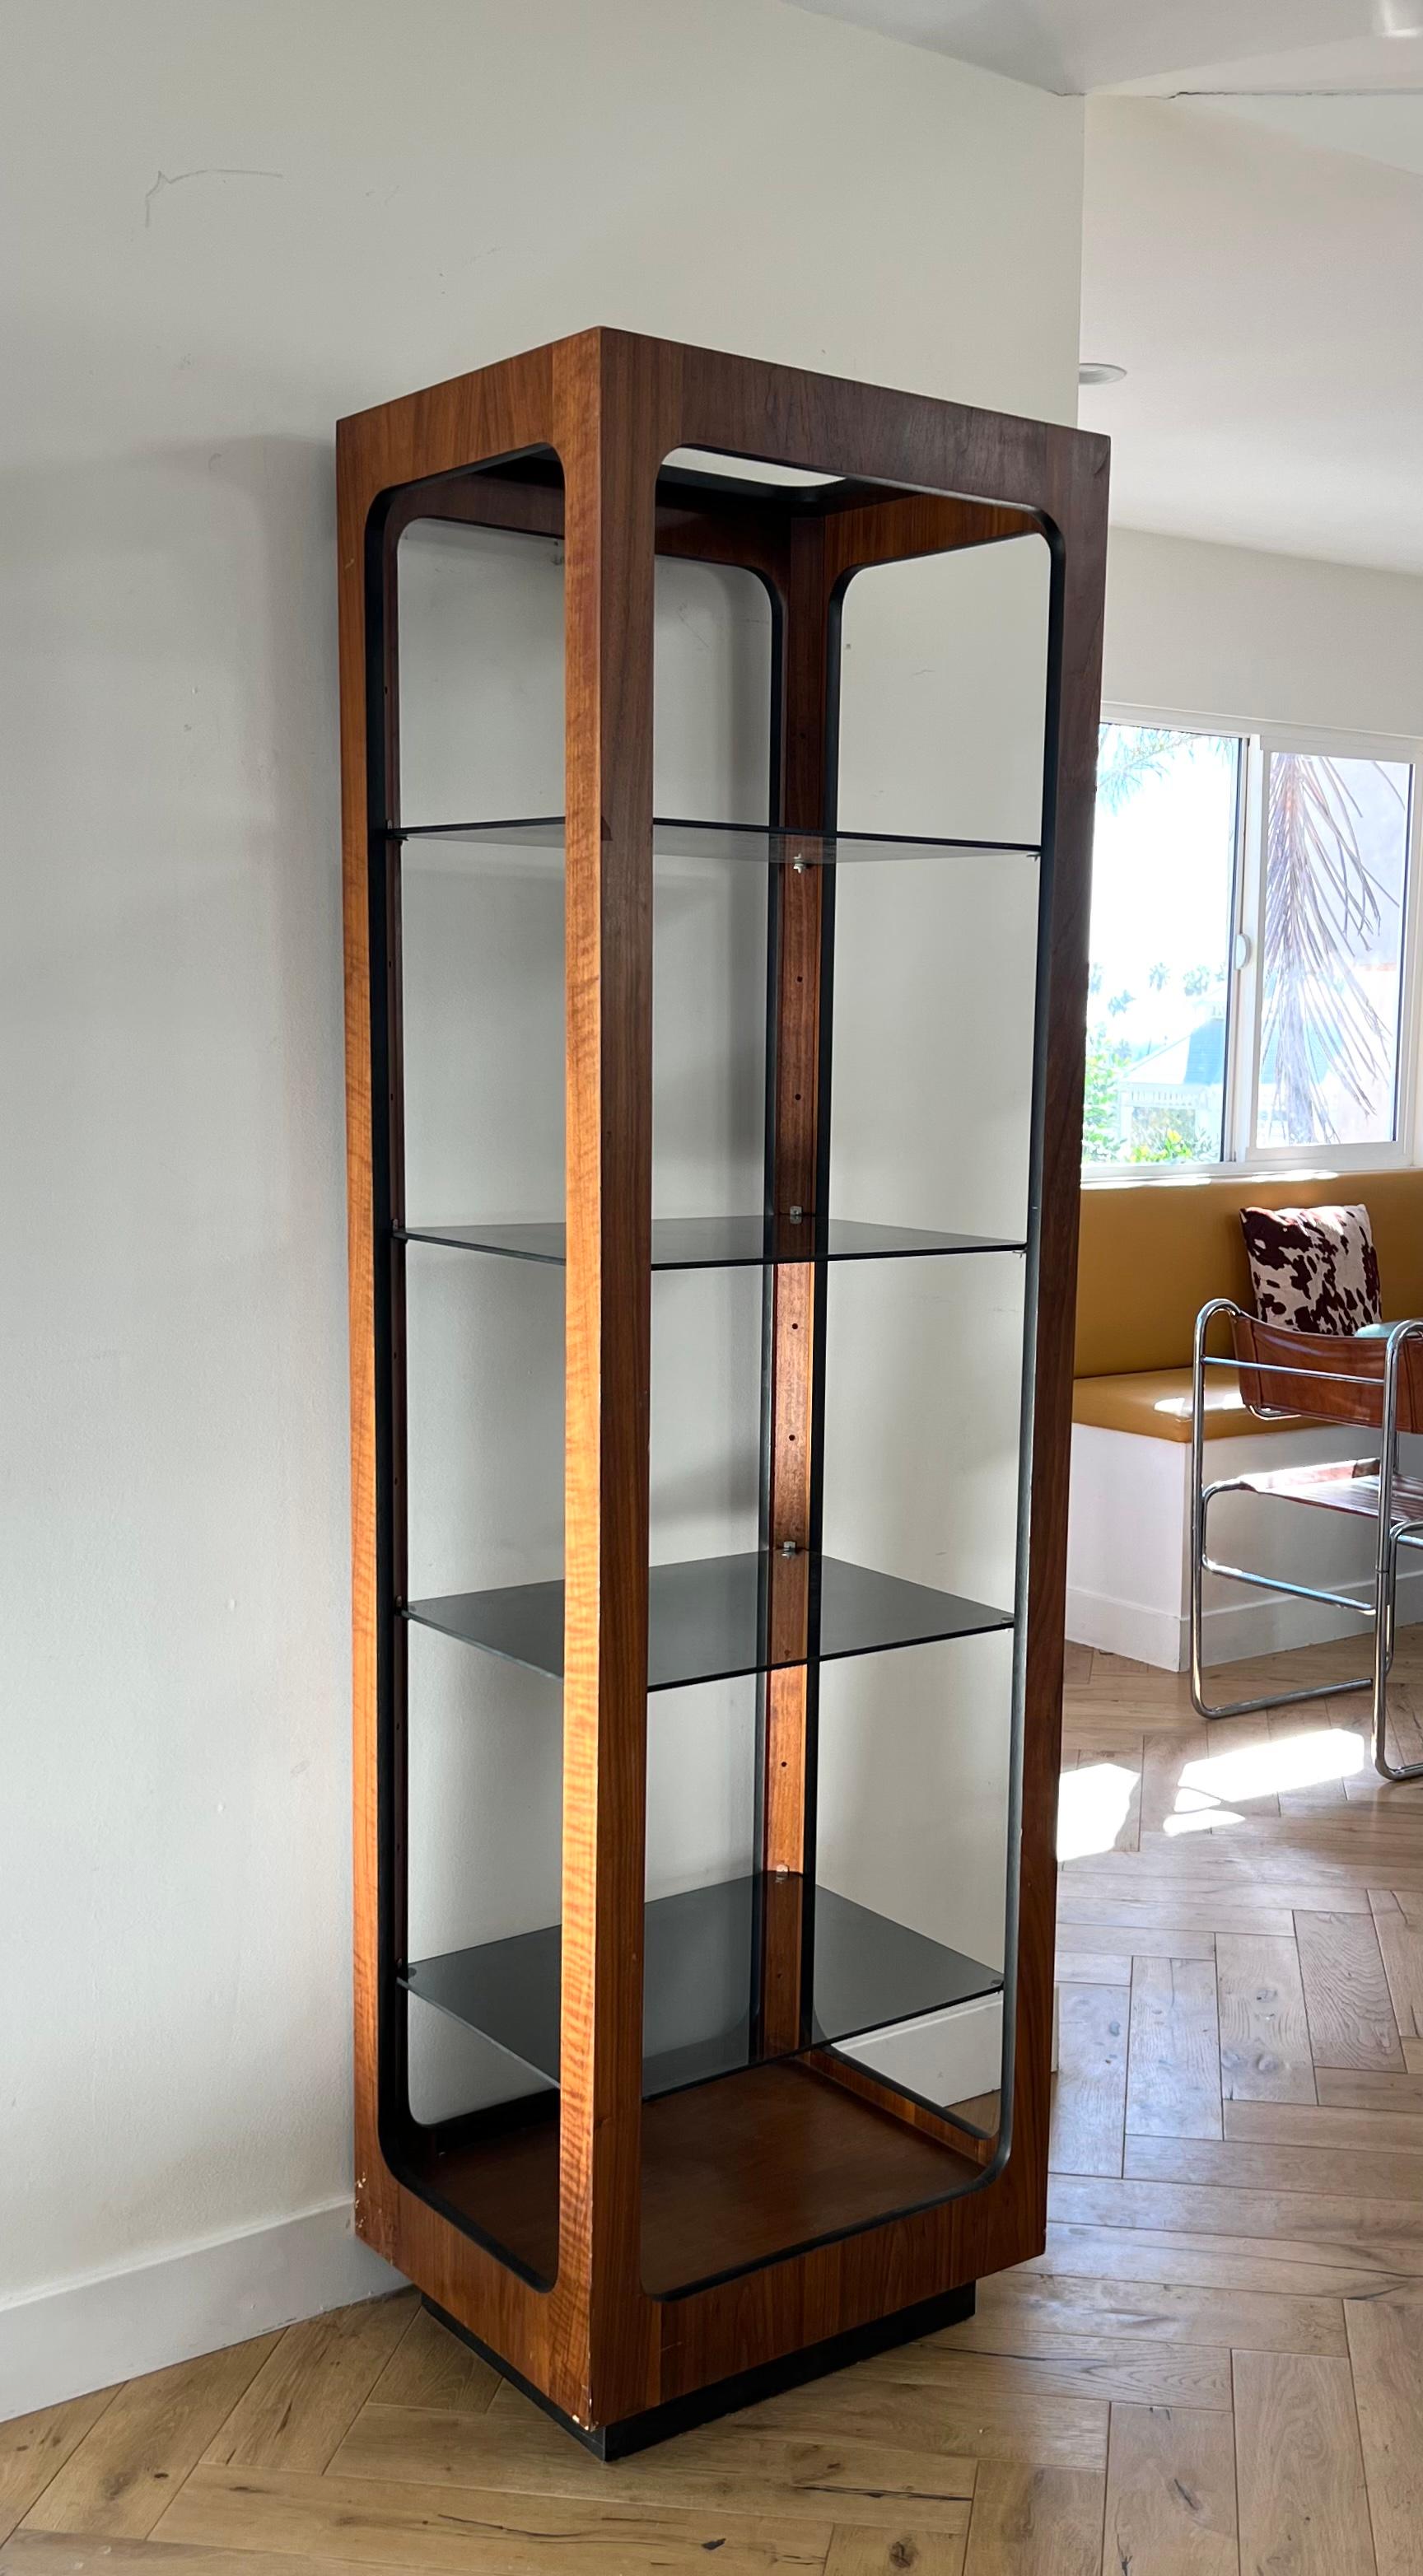 A Mid-Century Modern walnut and smoked glass étagère by Lane, early 1970s. A few nicks to veneer (as shown in photos) but otherwise great vintage condition. Glass shelves are removable for storage and transport. Pick up in central west Los Angeles